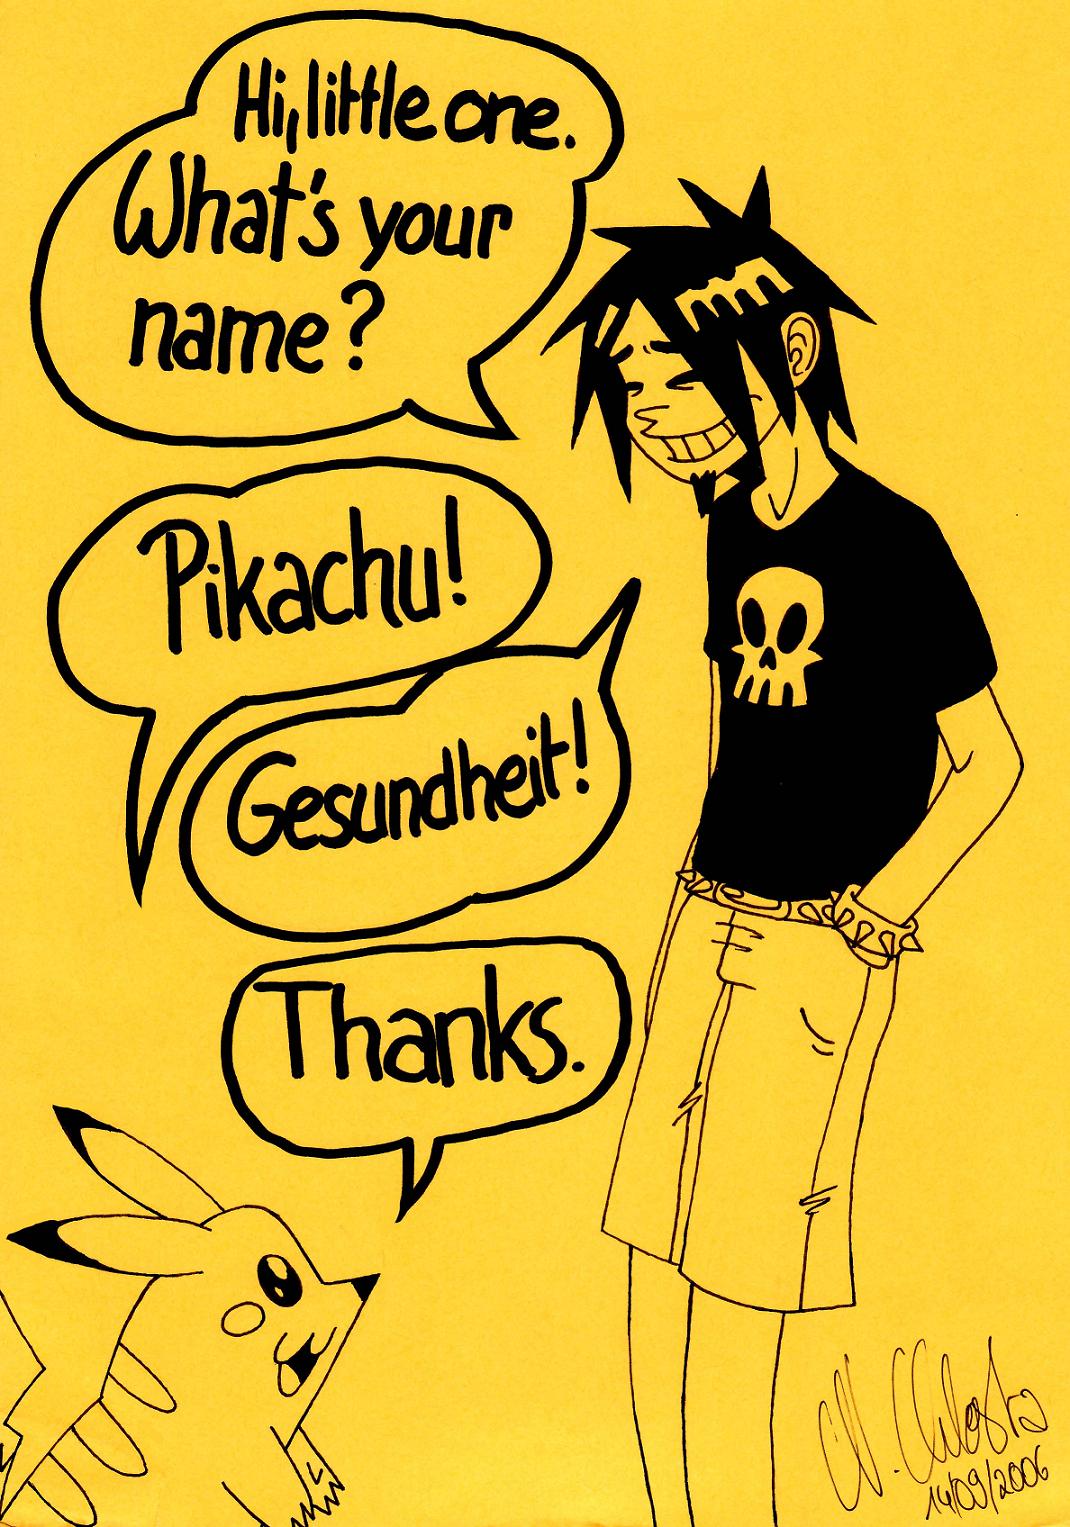 Alan from Awesome 5 meets Pikachu by antihero